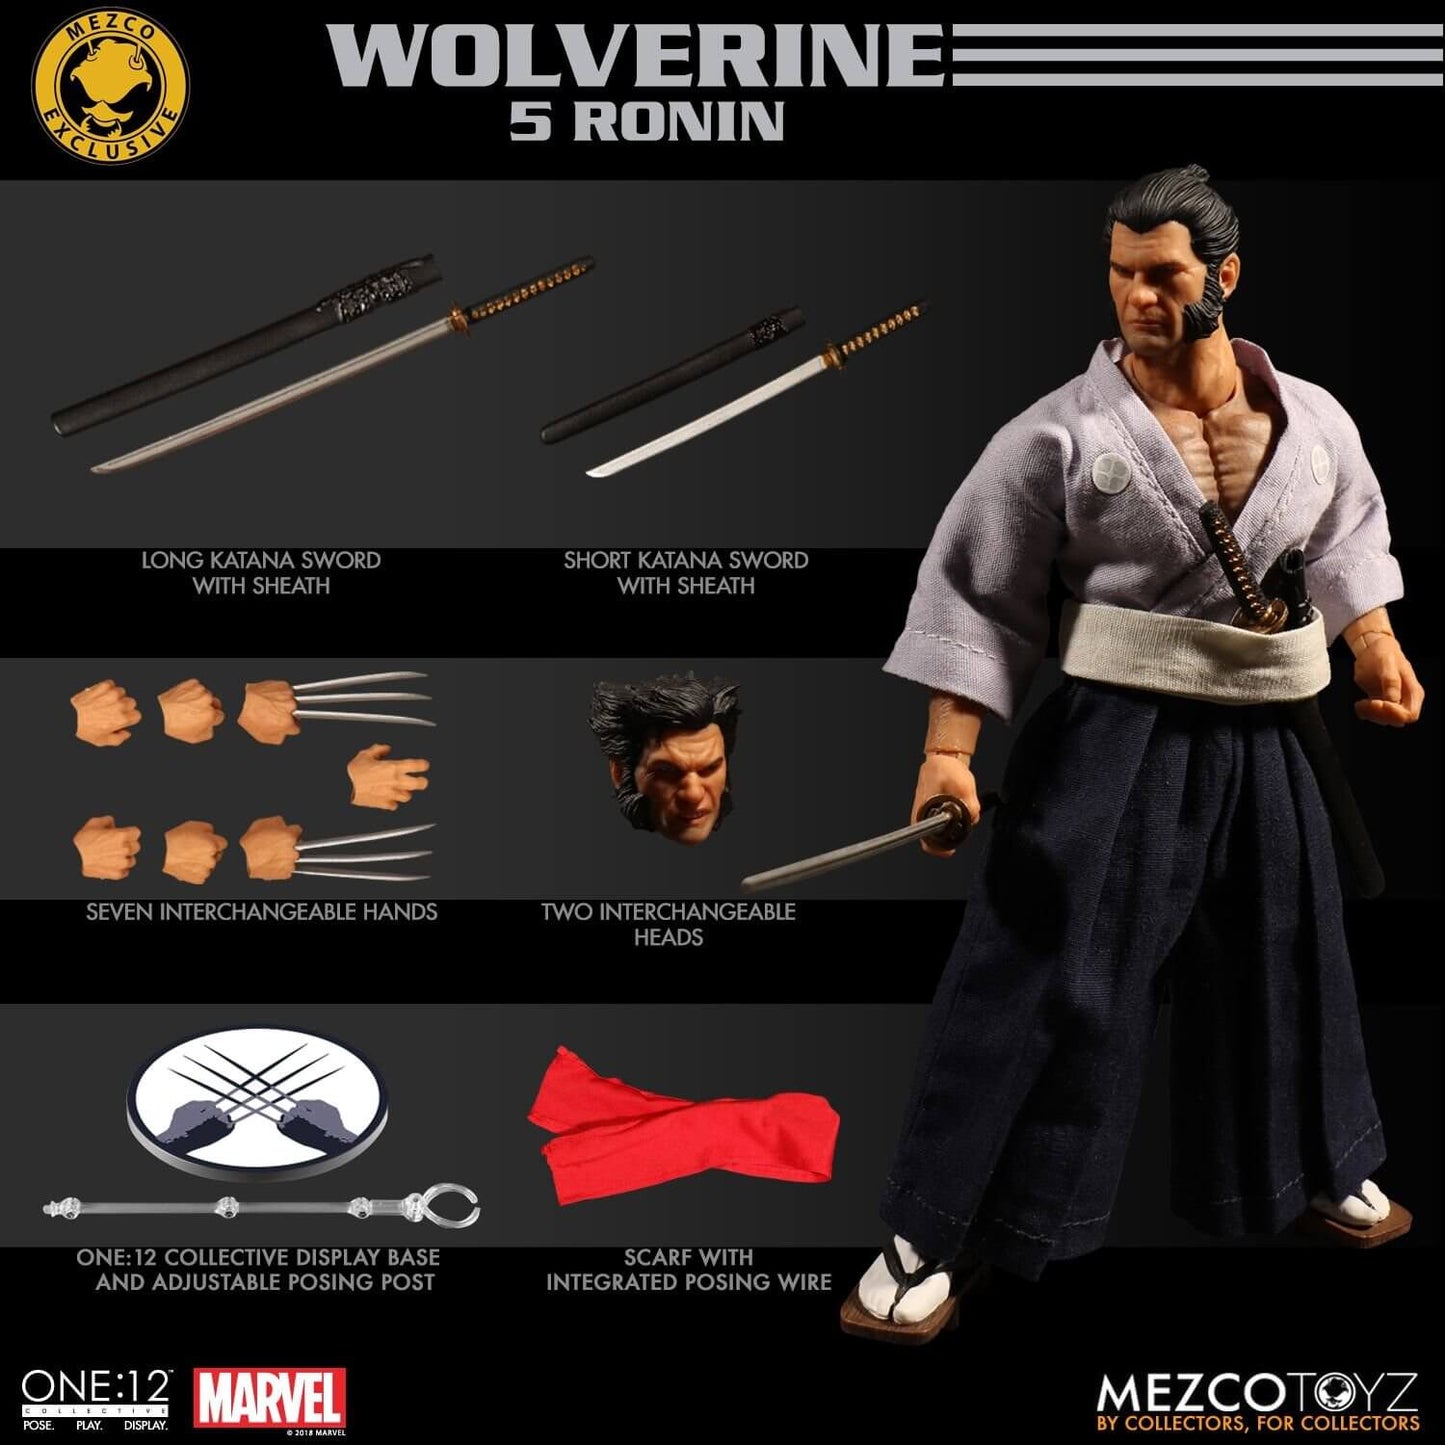 Mezco One:12 Collective Wolverine 5 Ronin